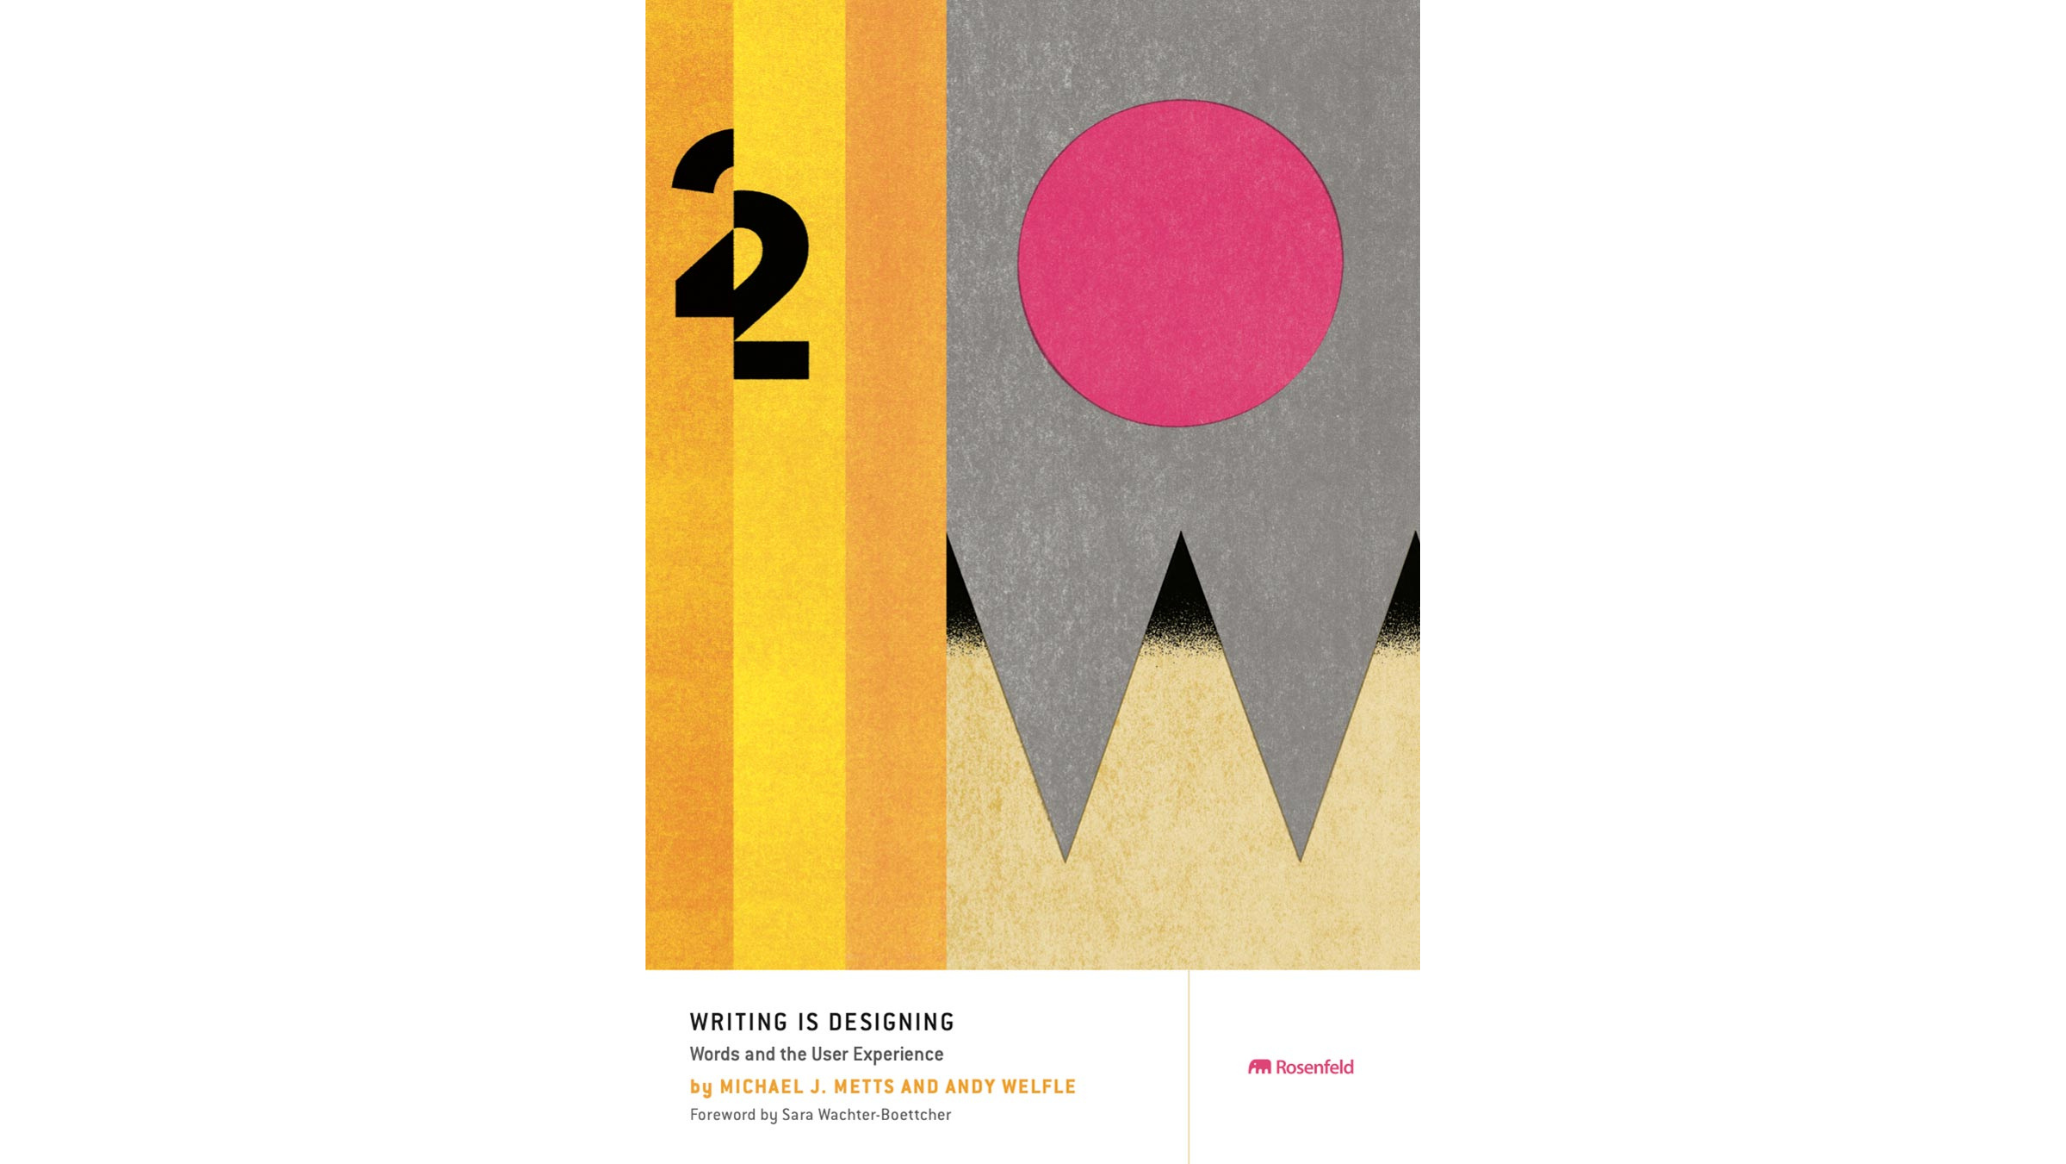 Book cover with grey, yellow and pink abstract shapes